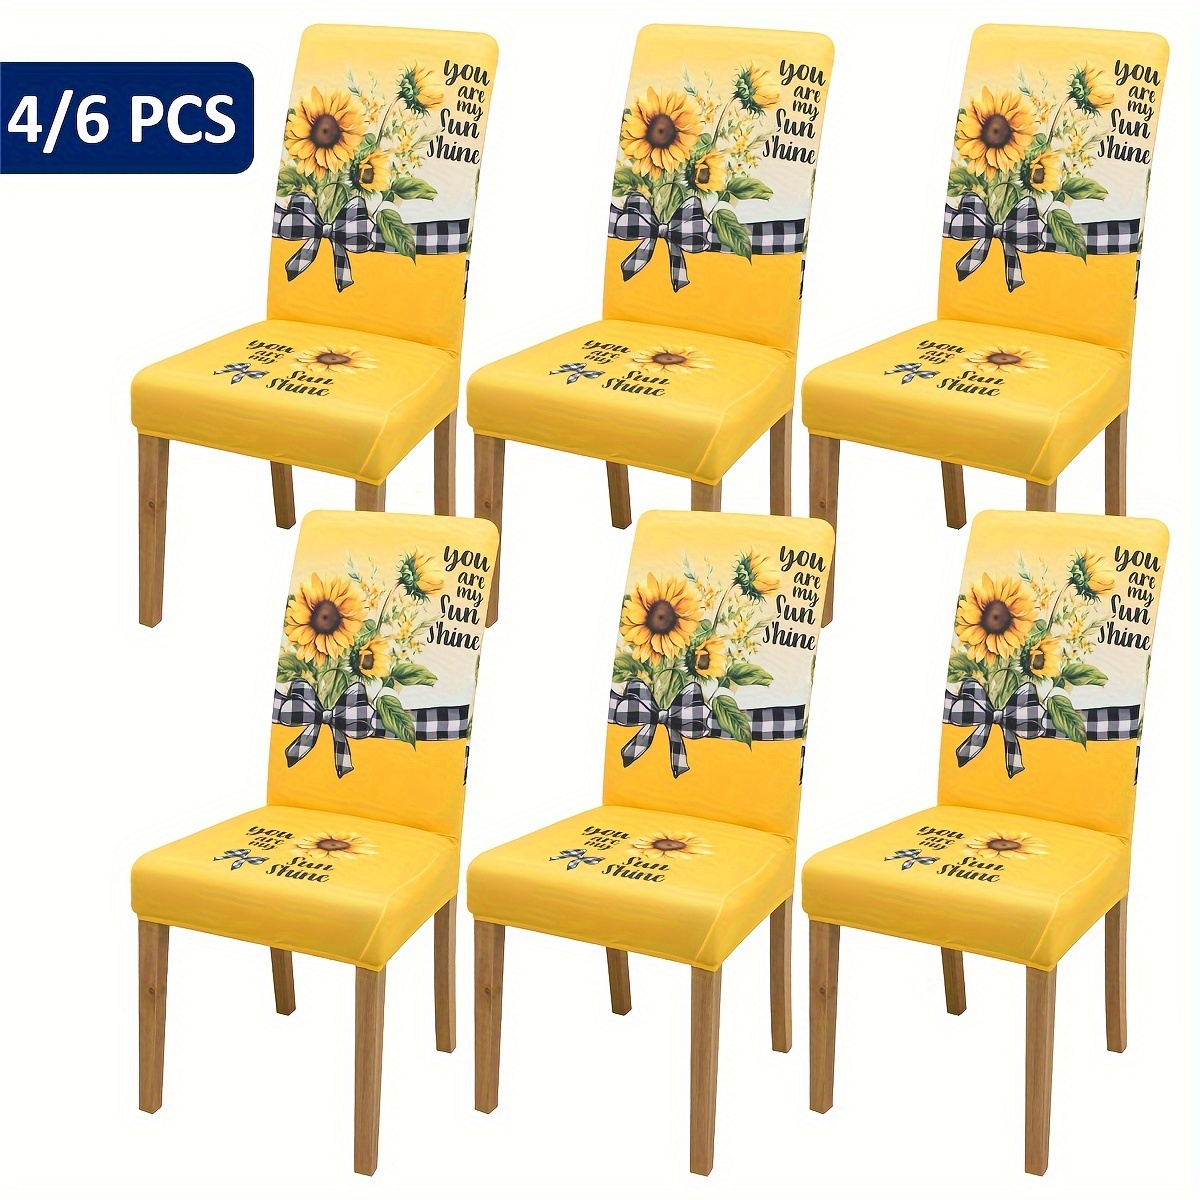 

4/6pcs Sunflower Pattern Chair Slipcovers, Dining Chair Cover, Furniture Protective Cover, For Dining Room Living Room Restaurant Home Decor